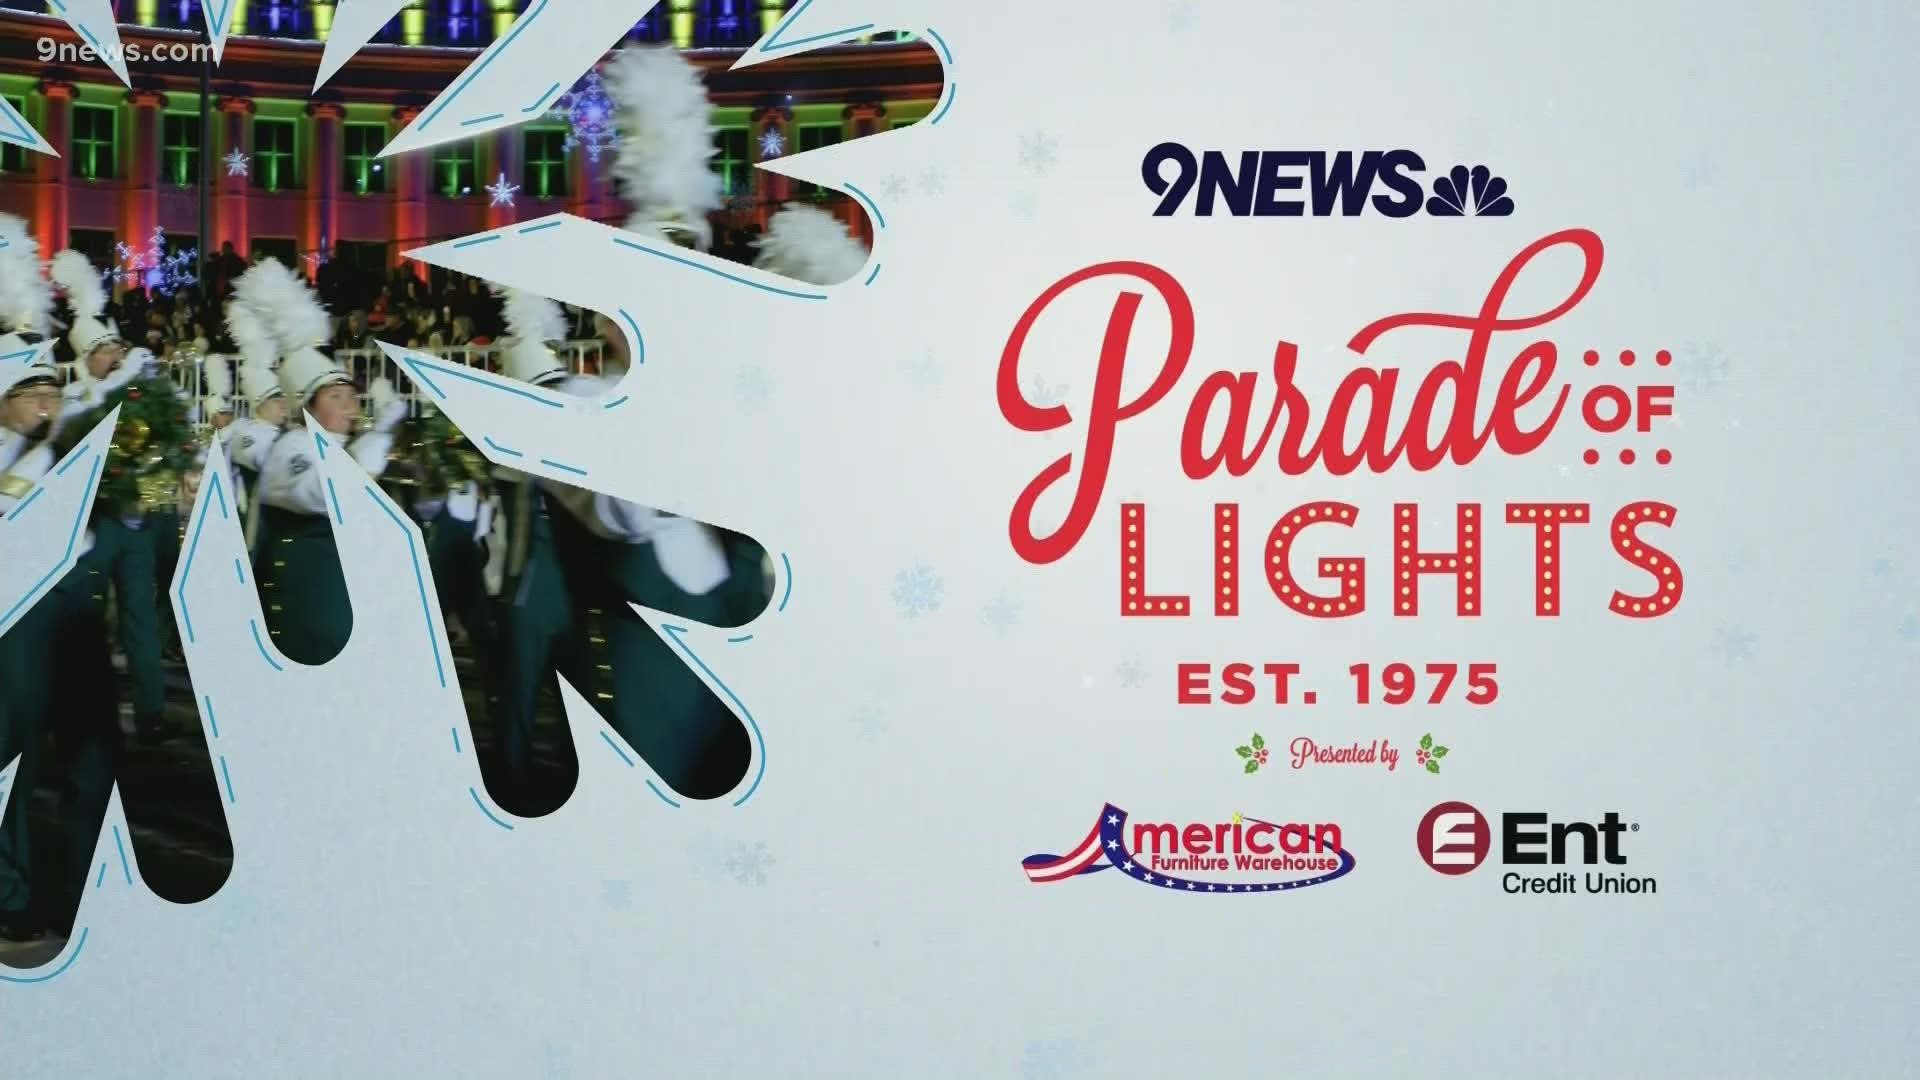 The 47th annual 9NEWS Parade of Lights took place Dec. 4, 2021 in downtown Denver.